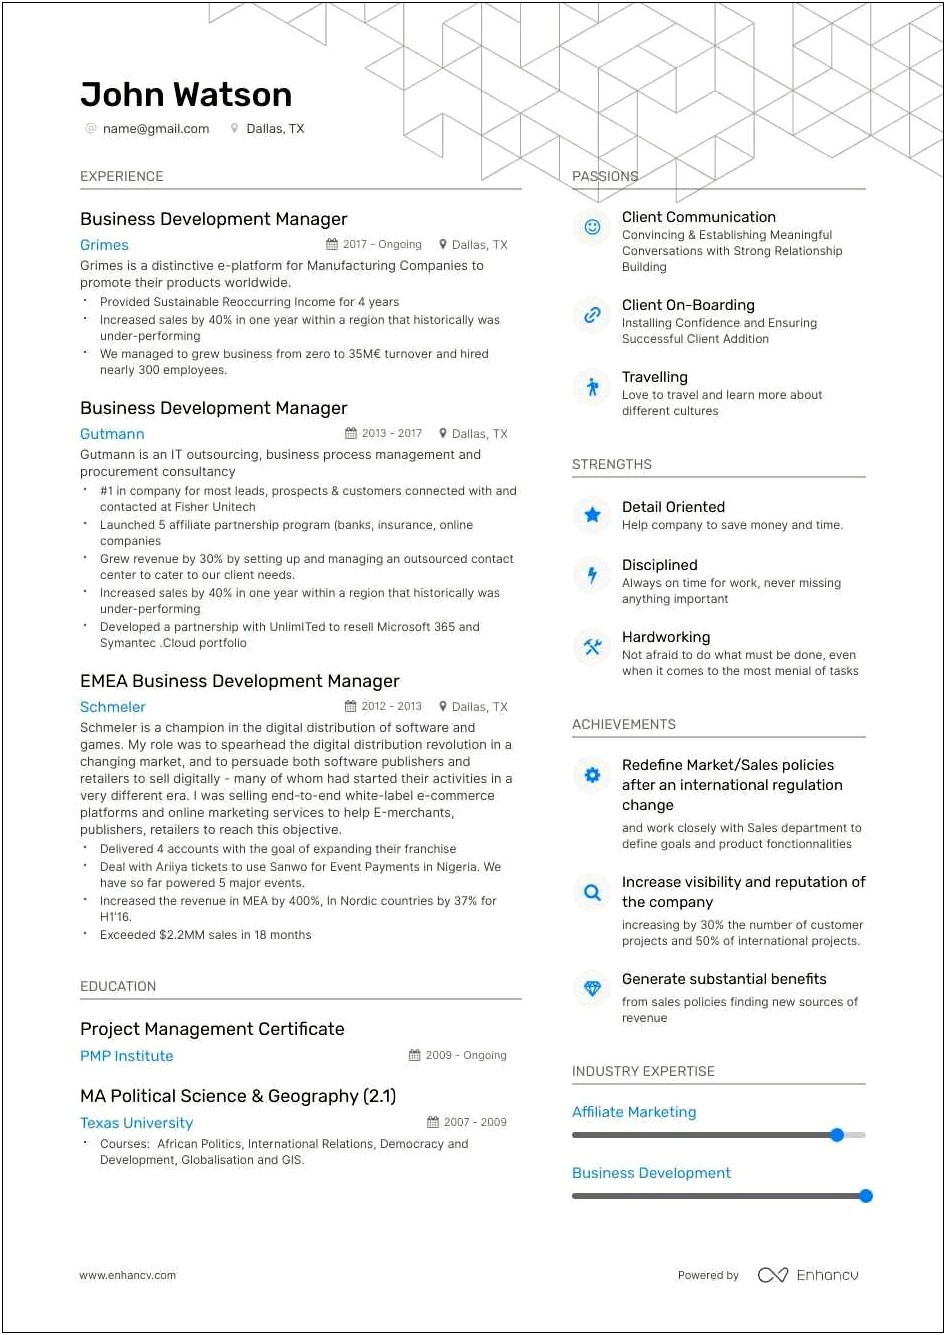 Resume Summary For Business Development Manager